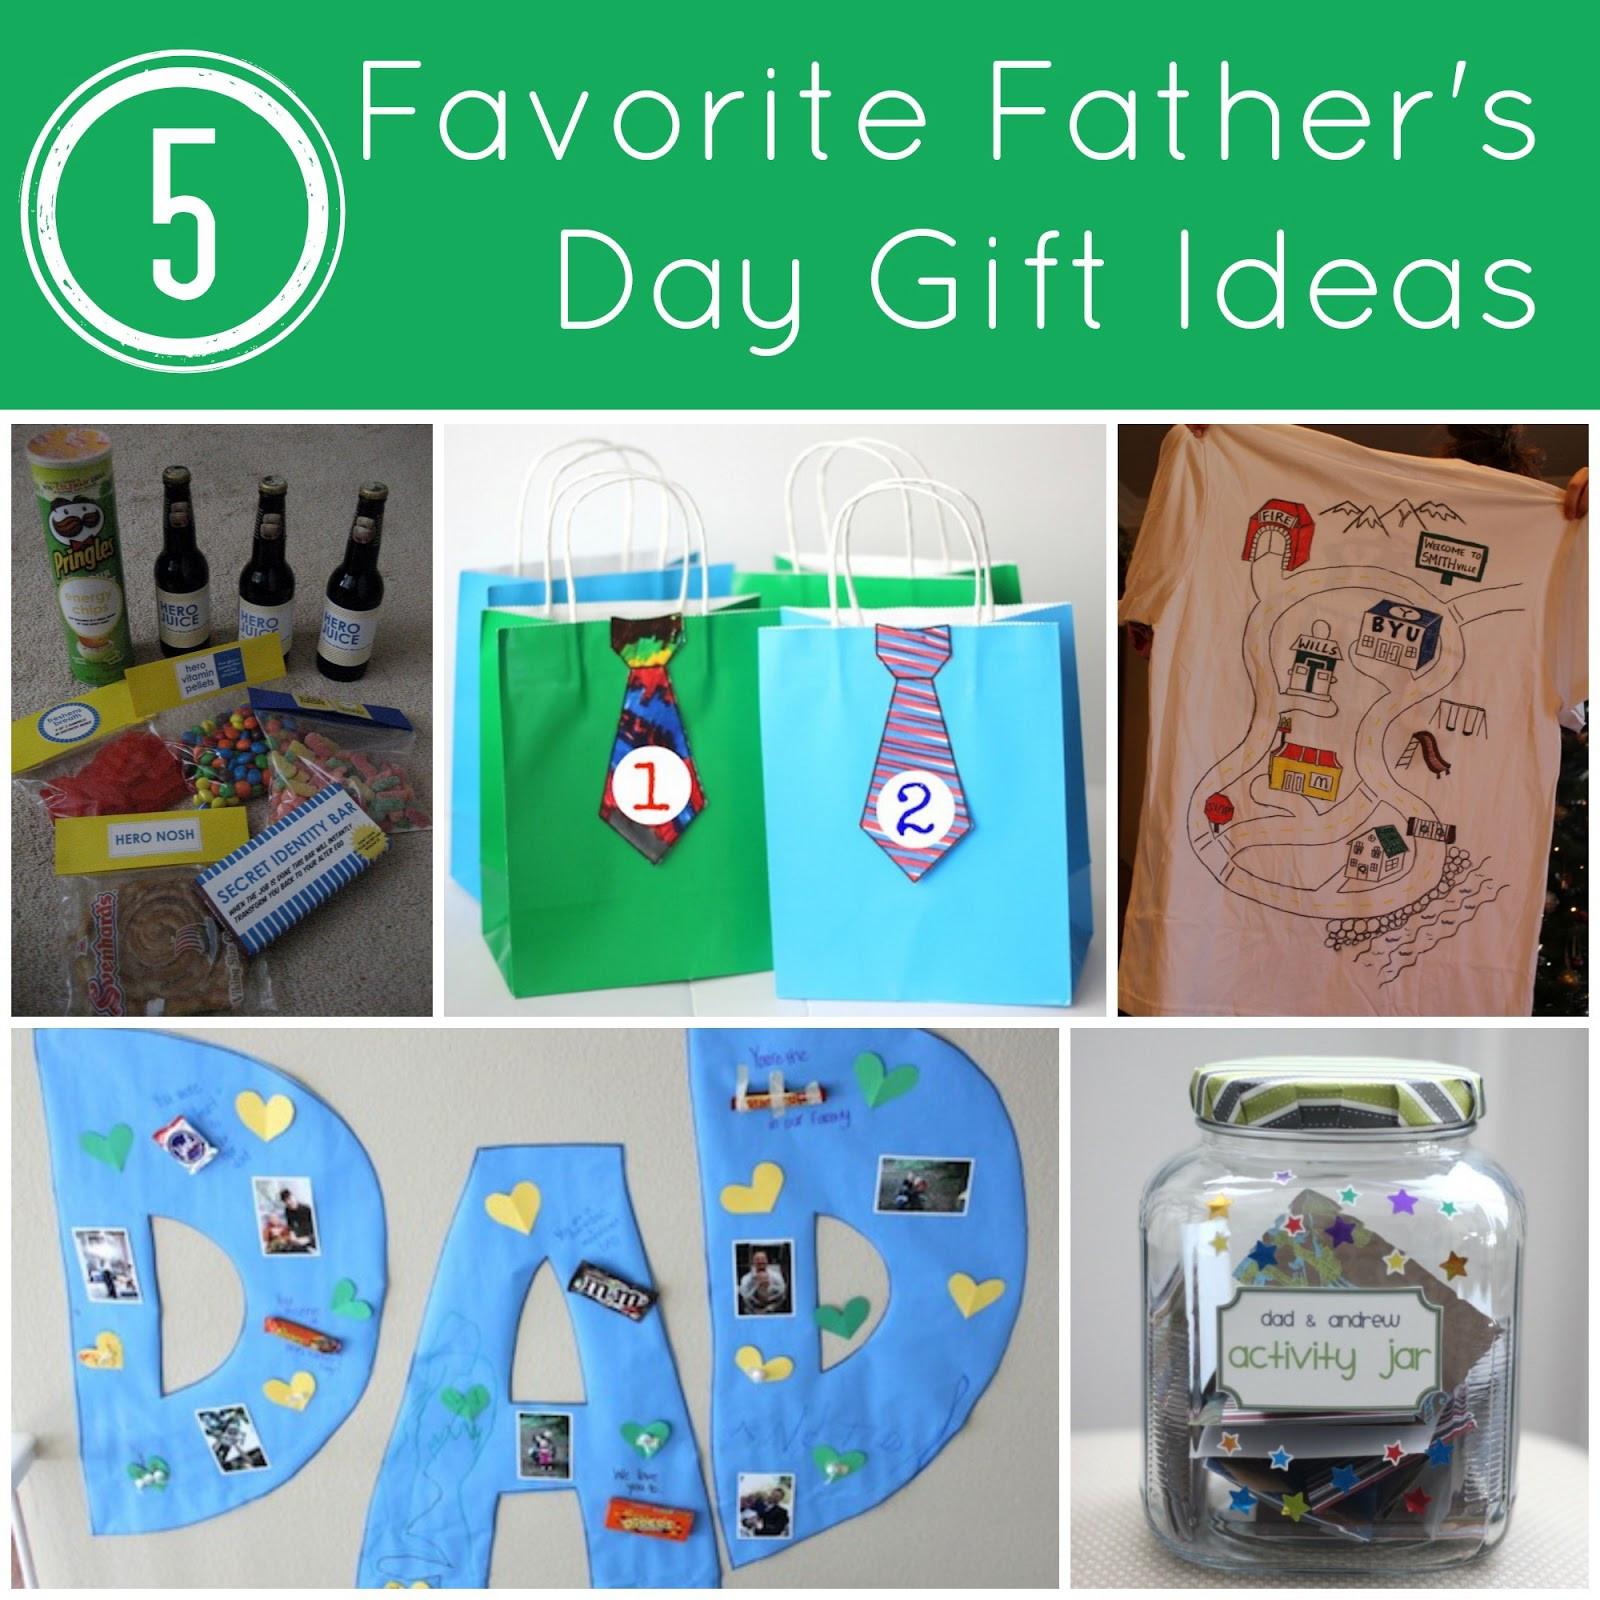 Fathers Day Gifts From Toddler
 Toddler Approved 5 Favorite Father s Day Gift Ideas